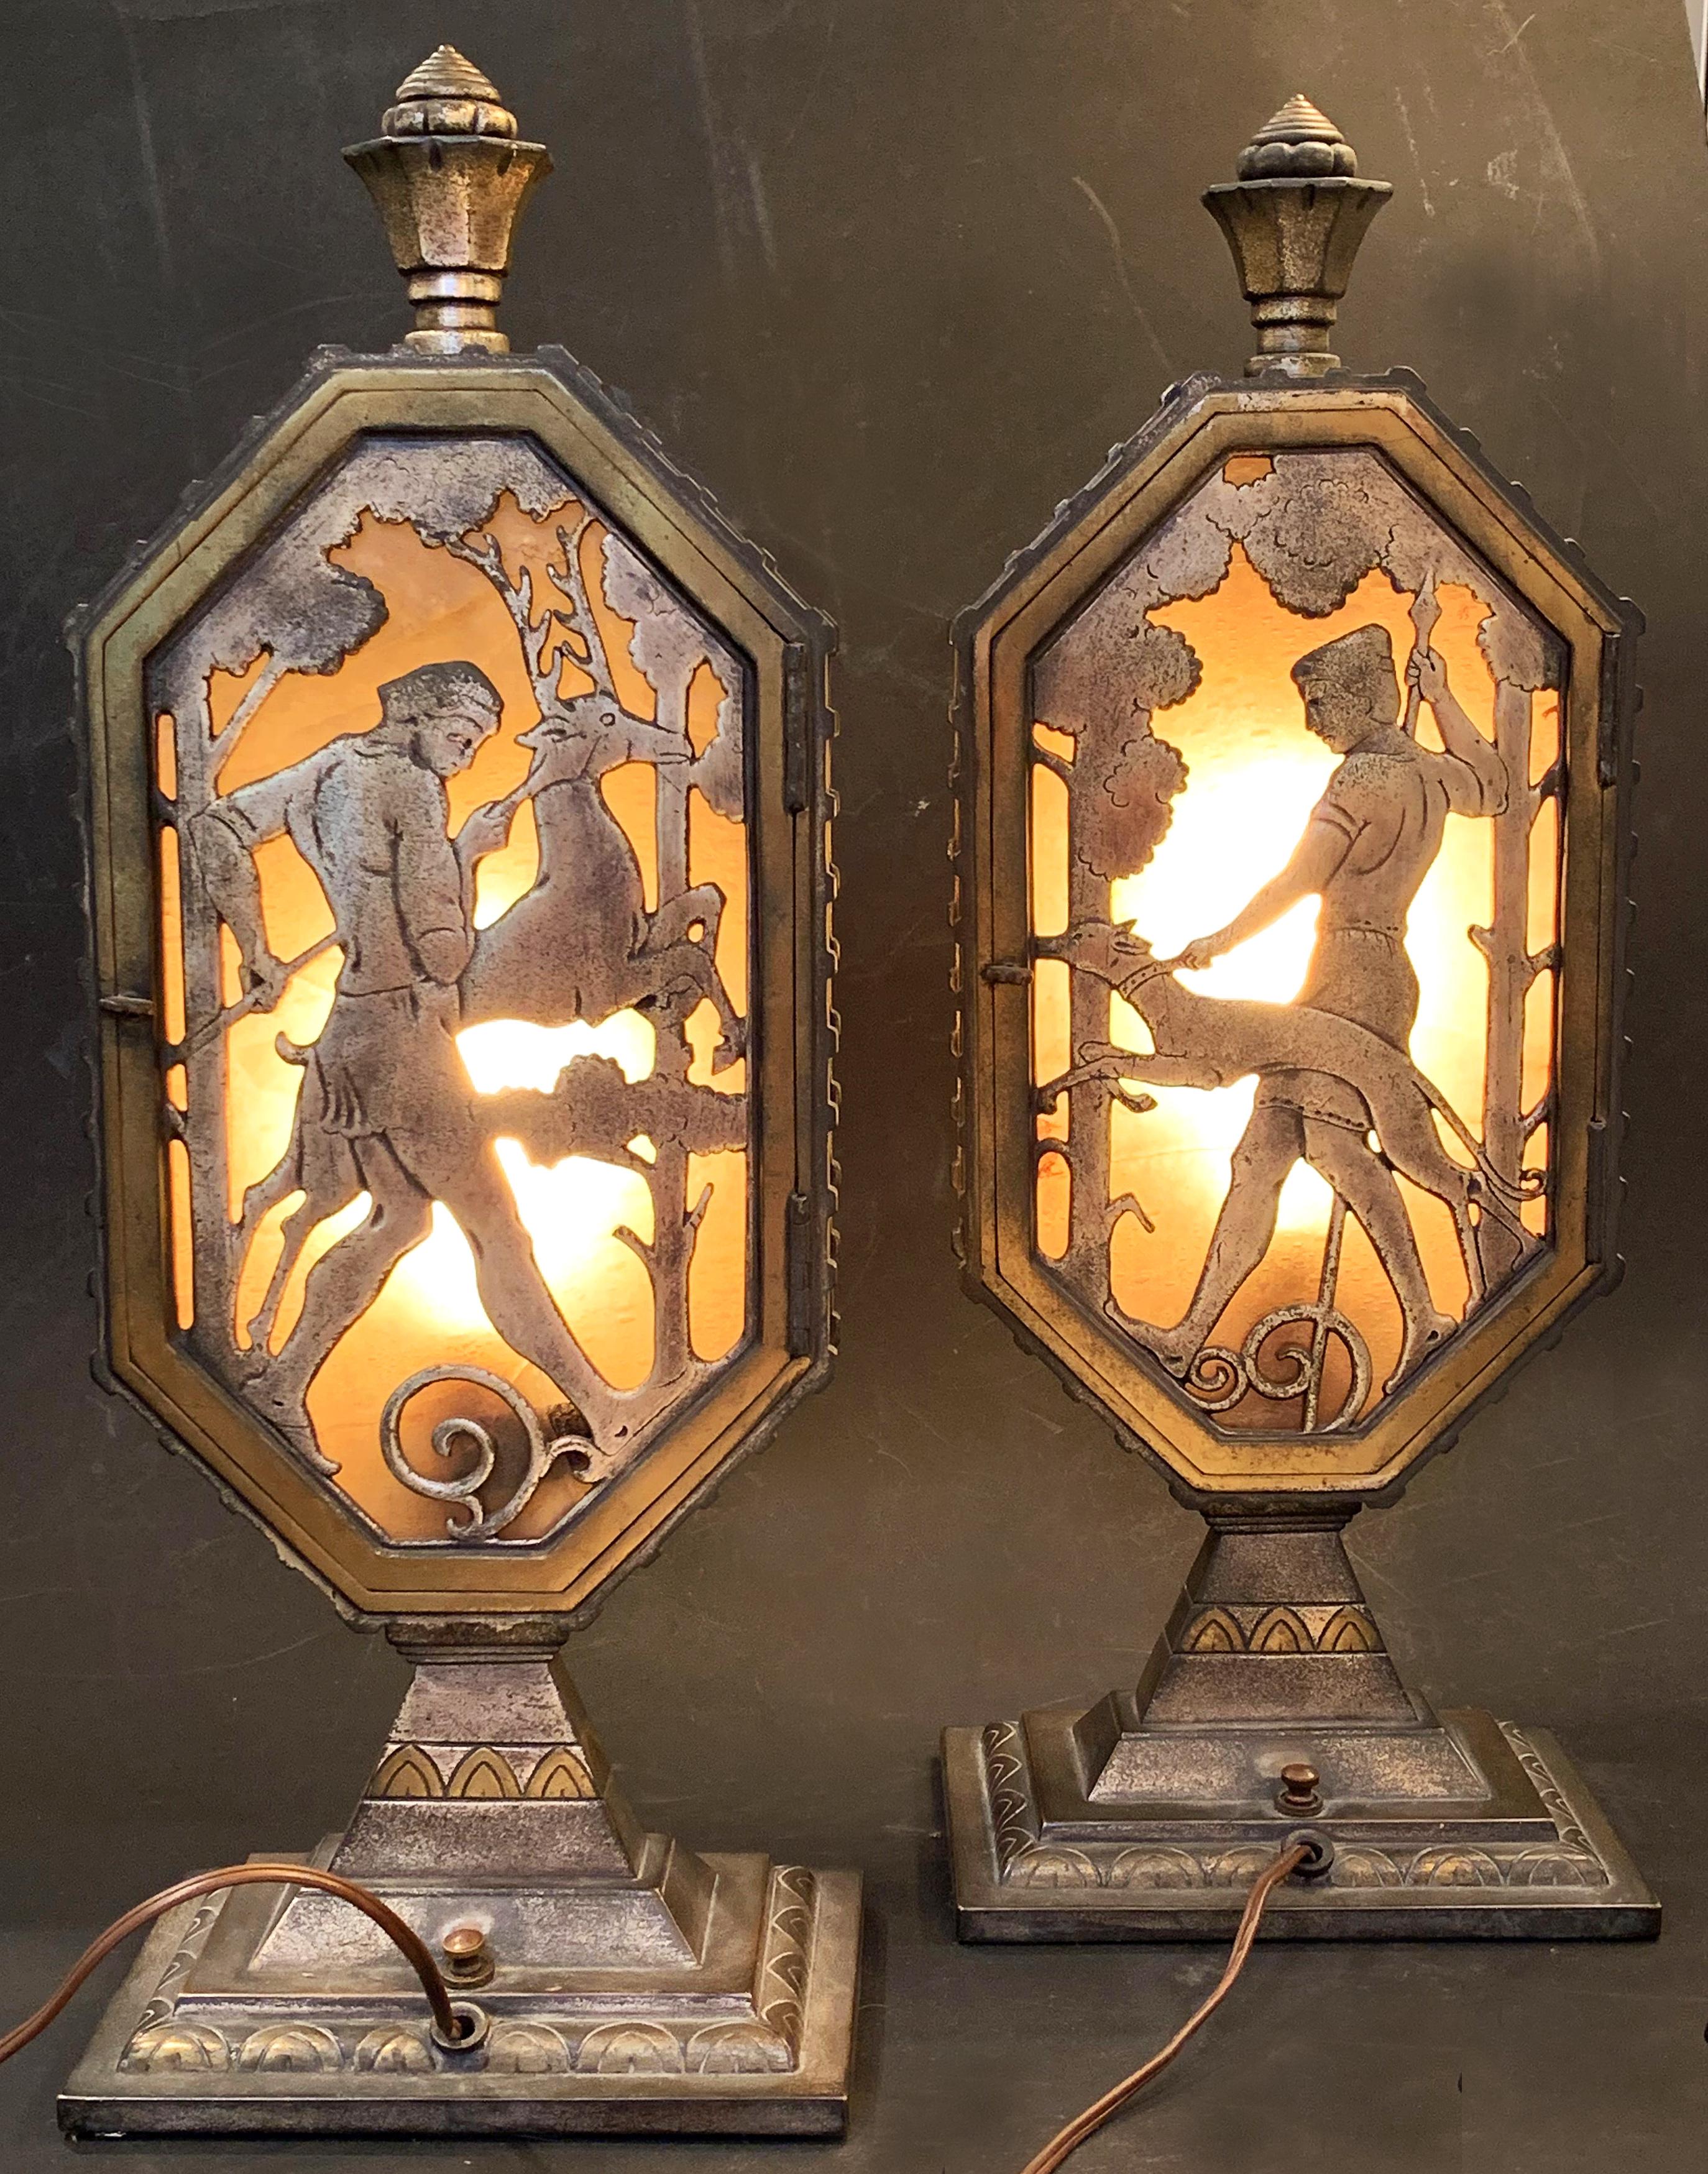 Rare and gorgeously crafted, this pair of illuminated bronze lamps depict a pair of hunters in Medieval garb, walking their hounds through the deep woods, as if in an old fairy tale or legend. The pierced bronze scenes, in silvered and patinated